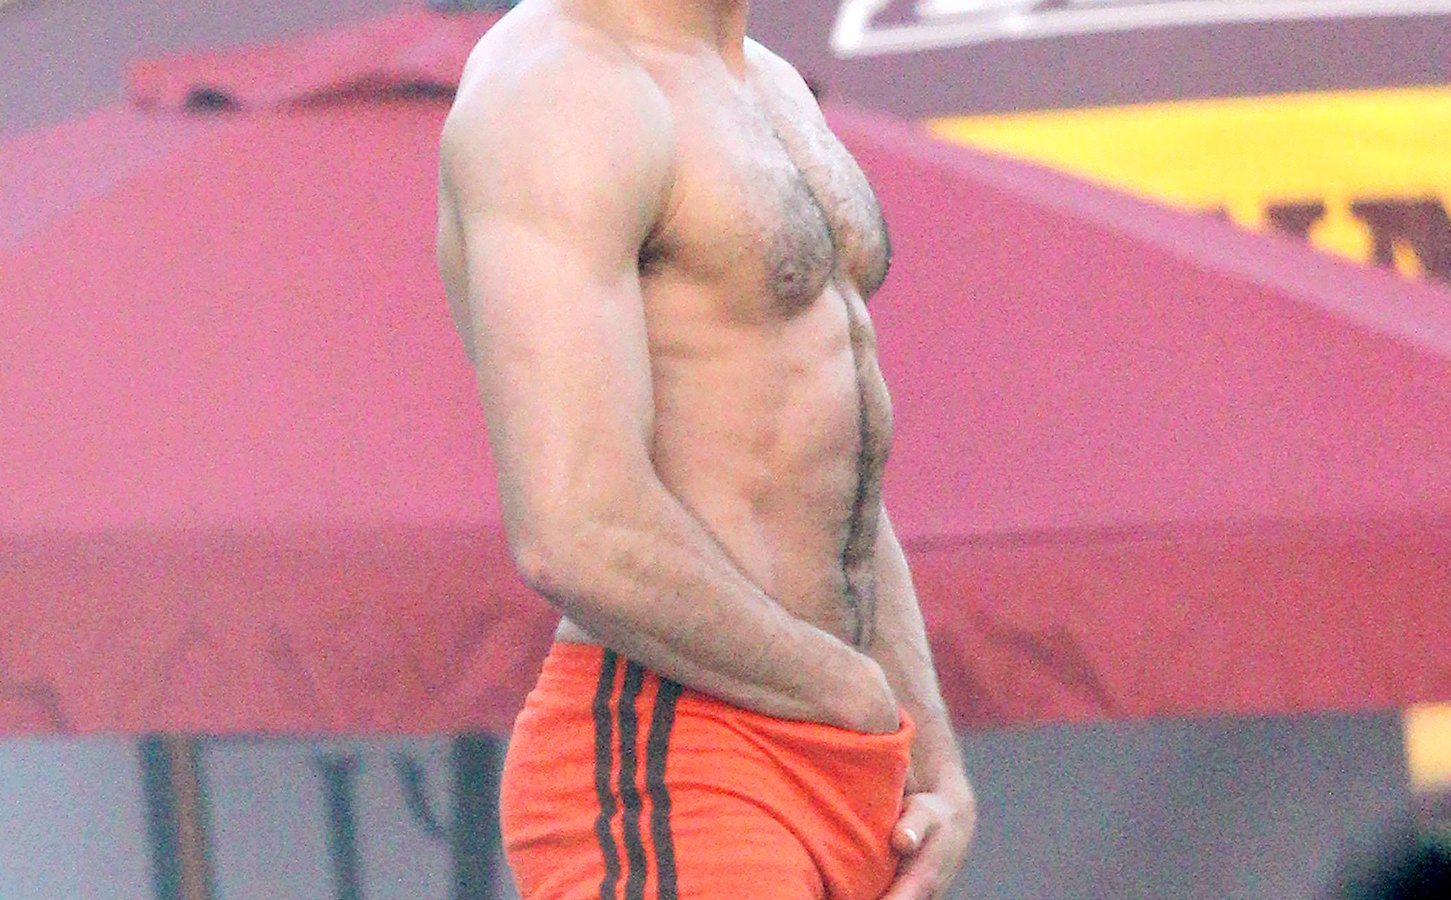 Zac Efron Has a Seriously Ripped Body